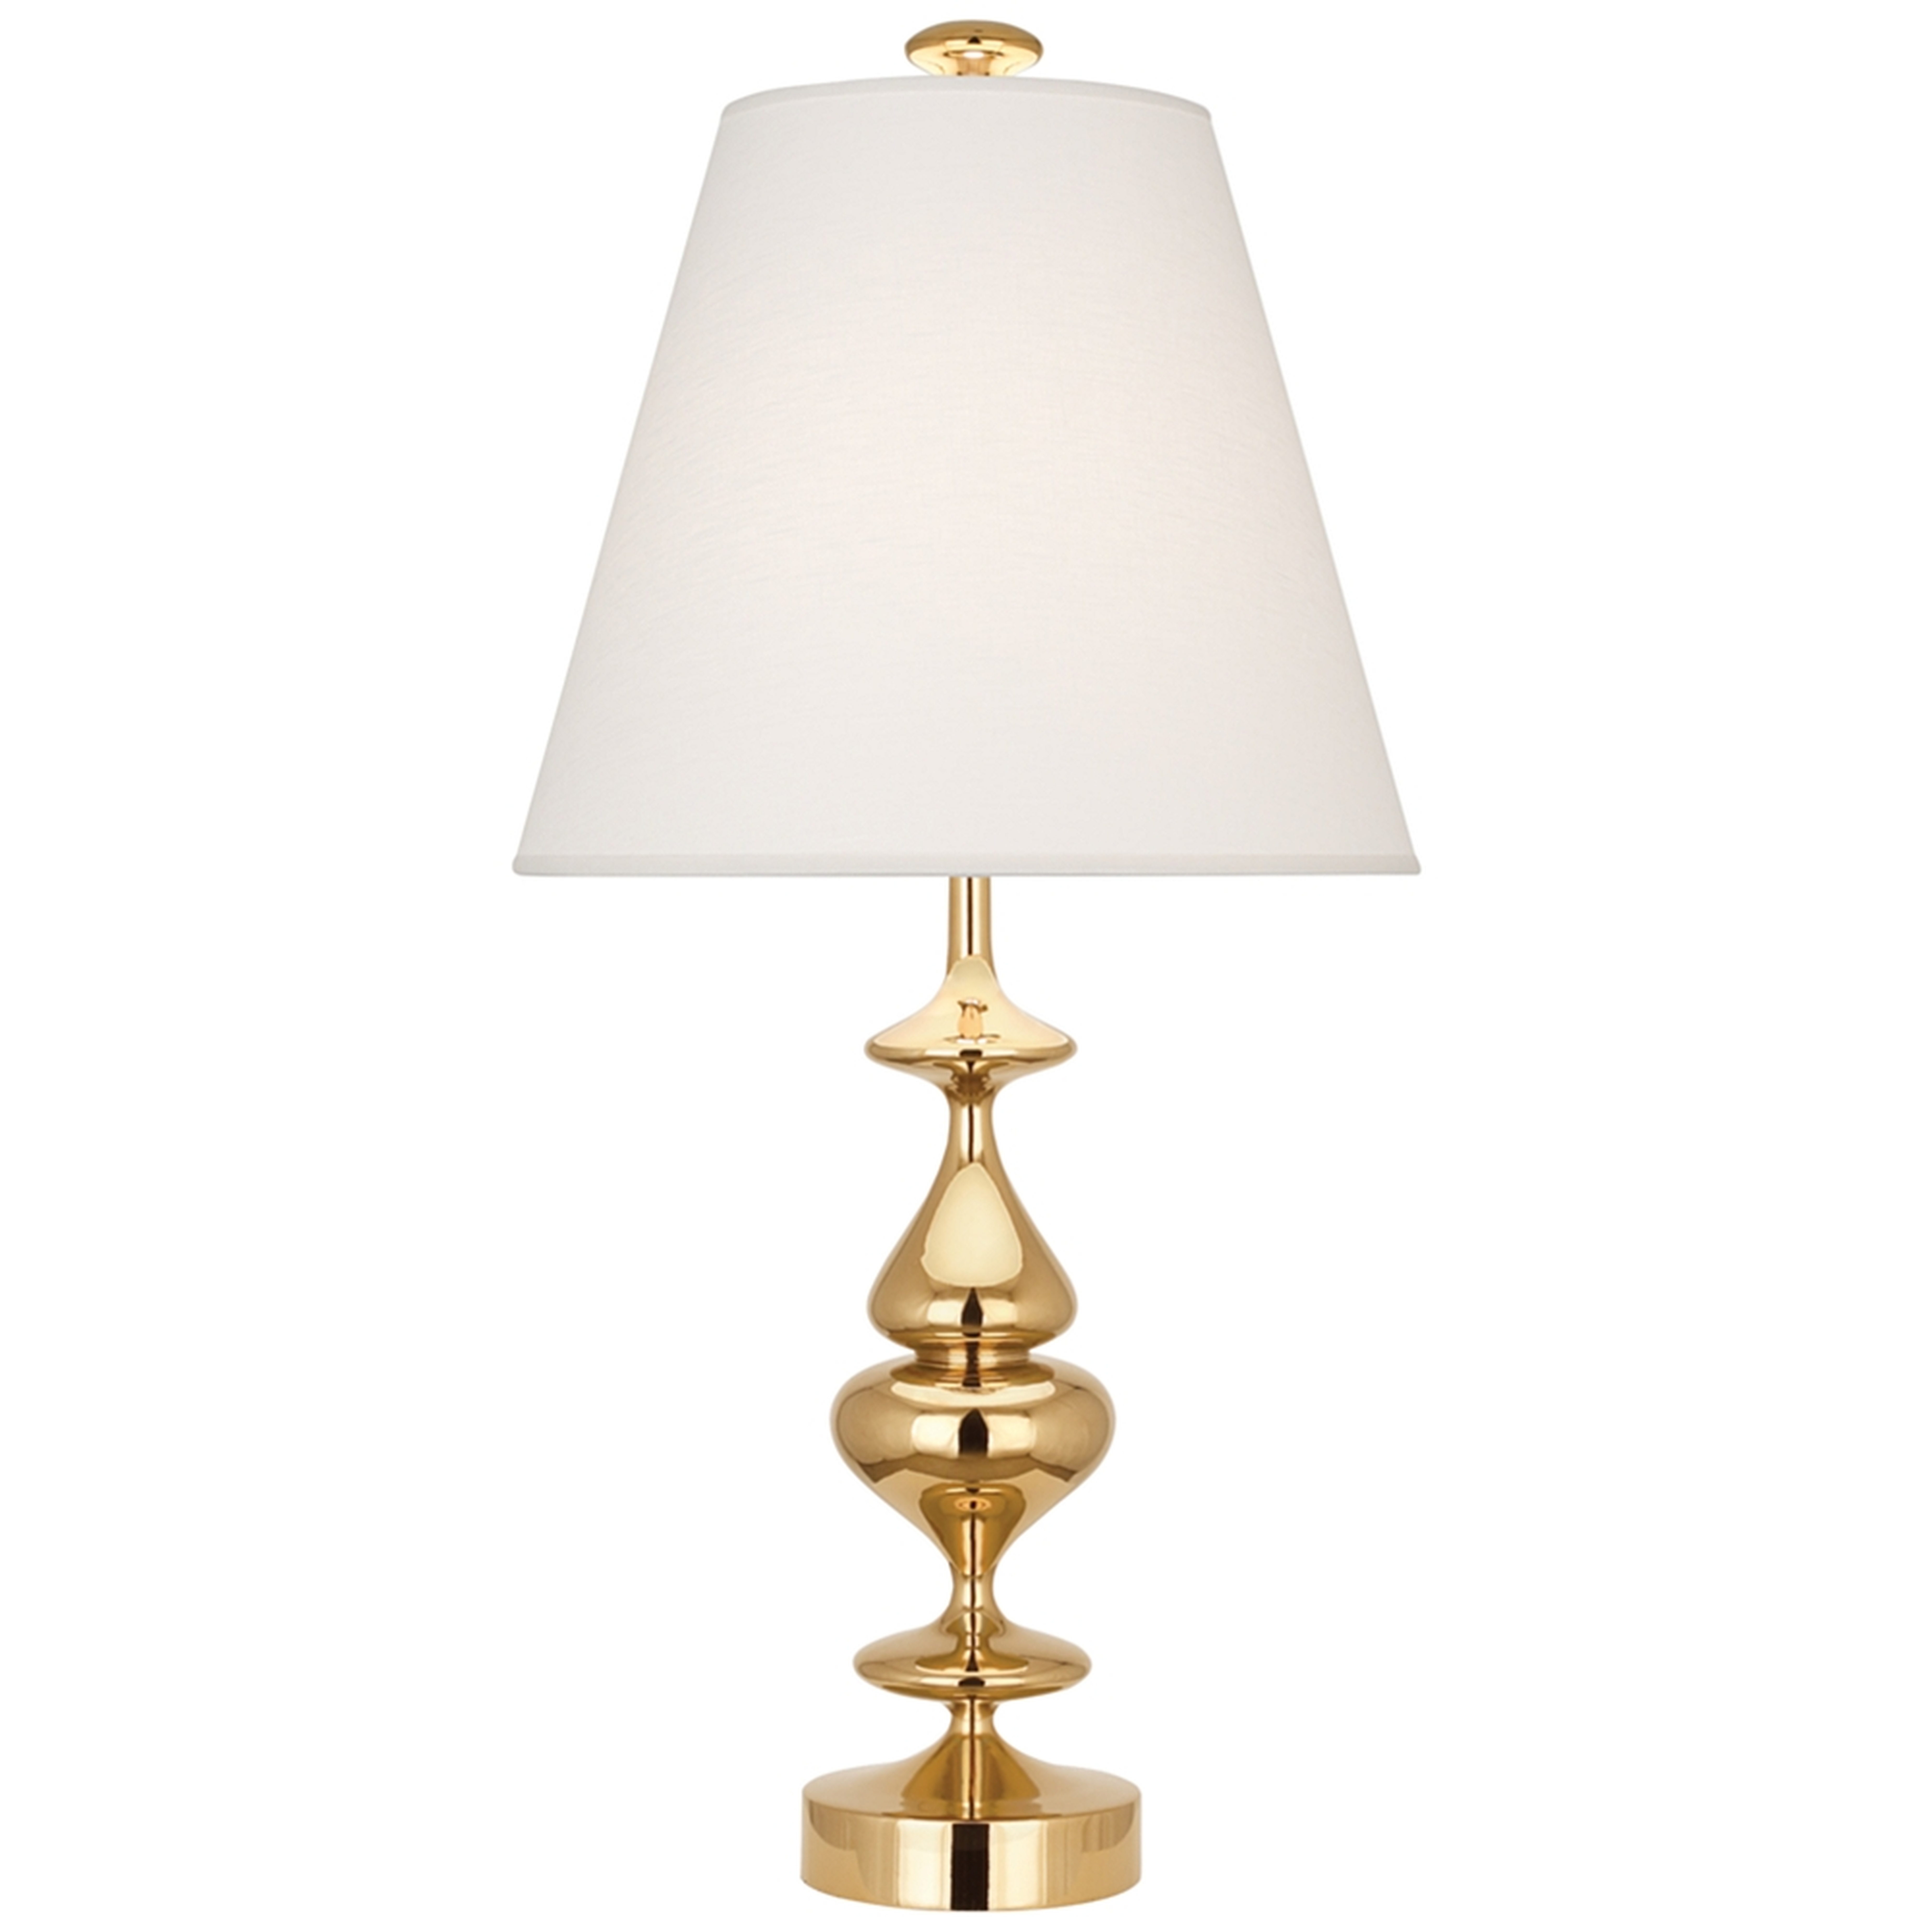 Jonathan Adler Hollywood Polished Brass Metal Table Lamp - Style # 98T68 - Lamps Plus